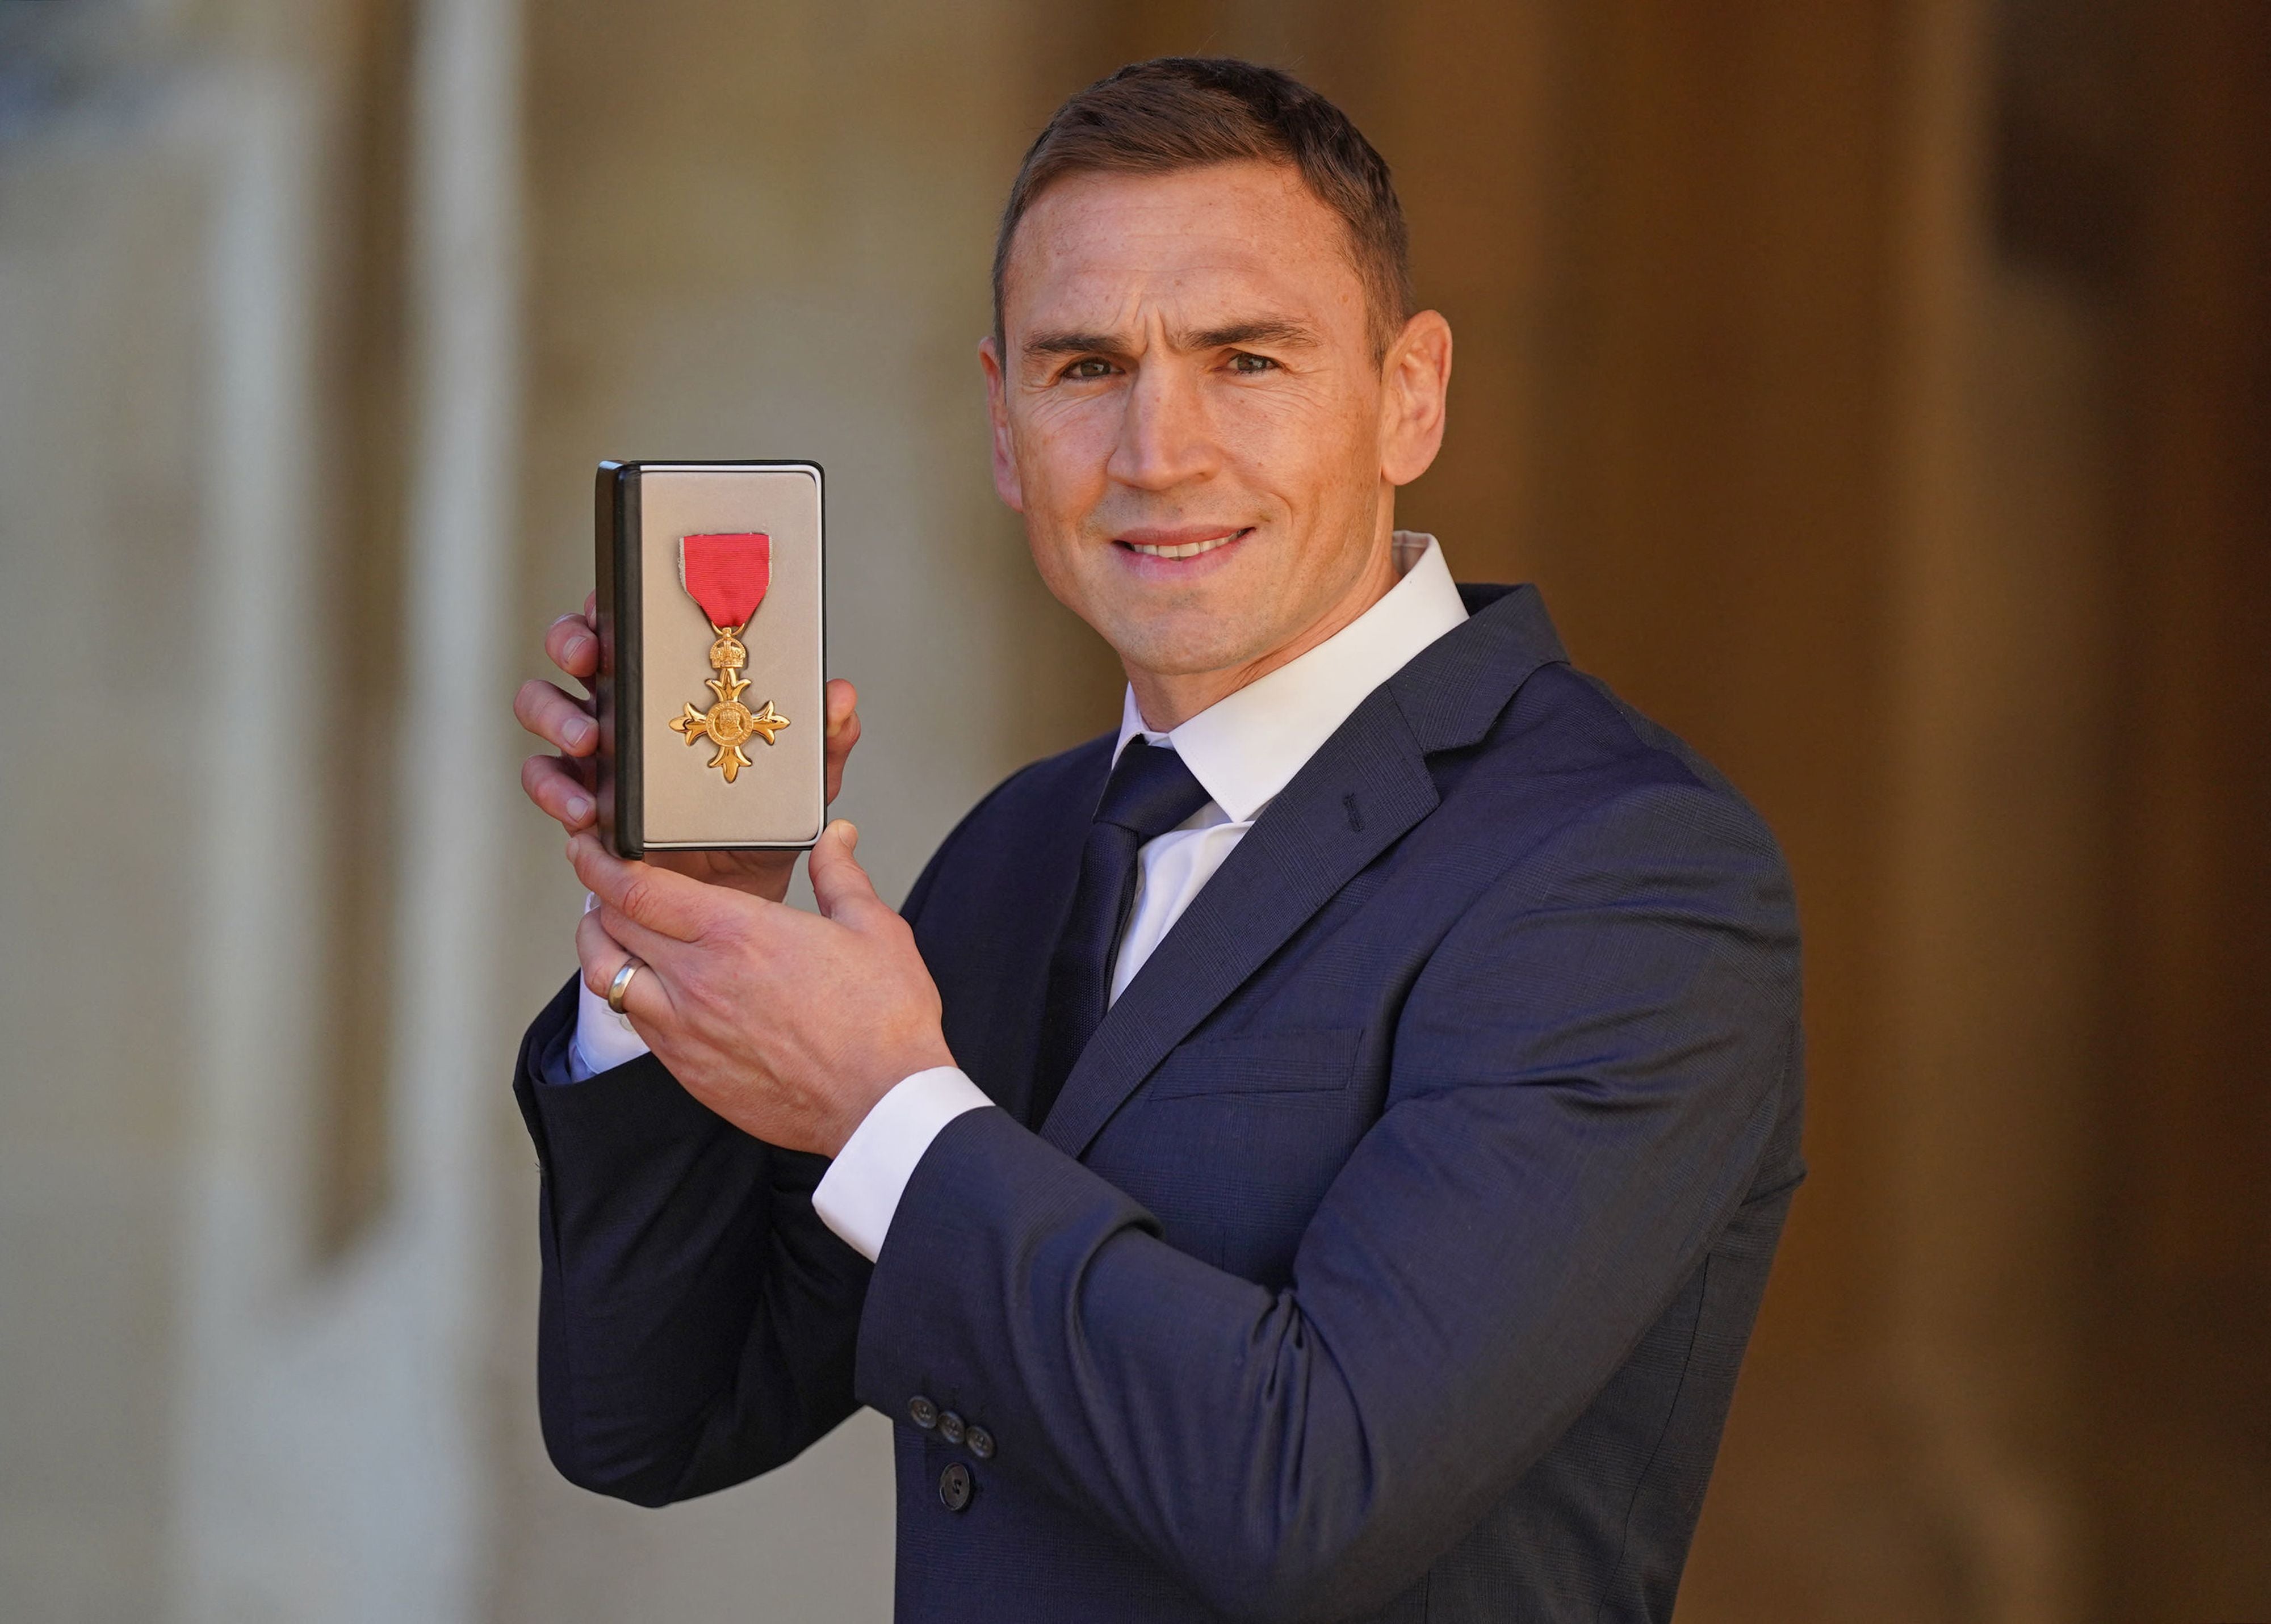 Kevin Sinfield was made an OBE in January 2022, but deserves to be upgraded to a knighthood